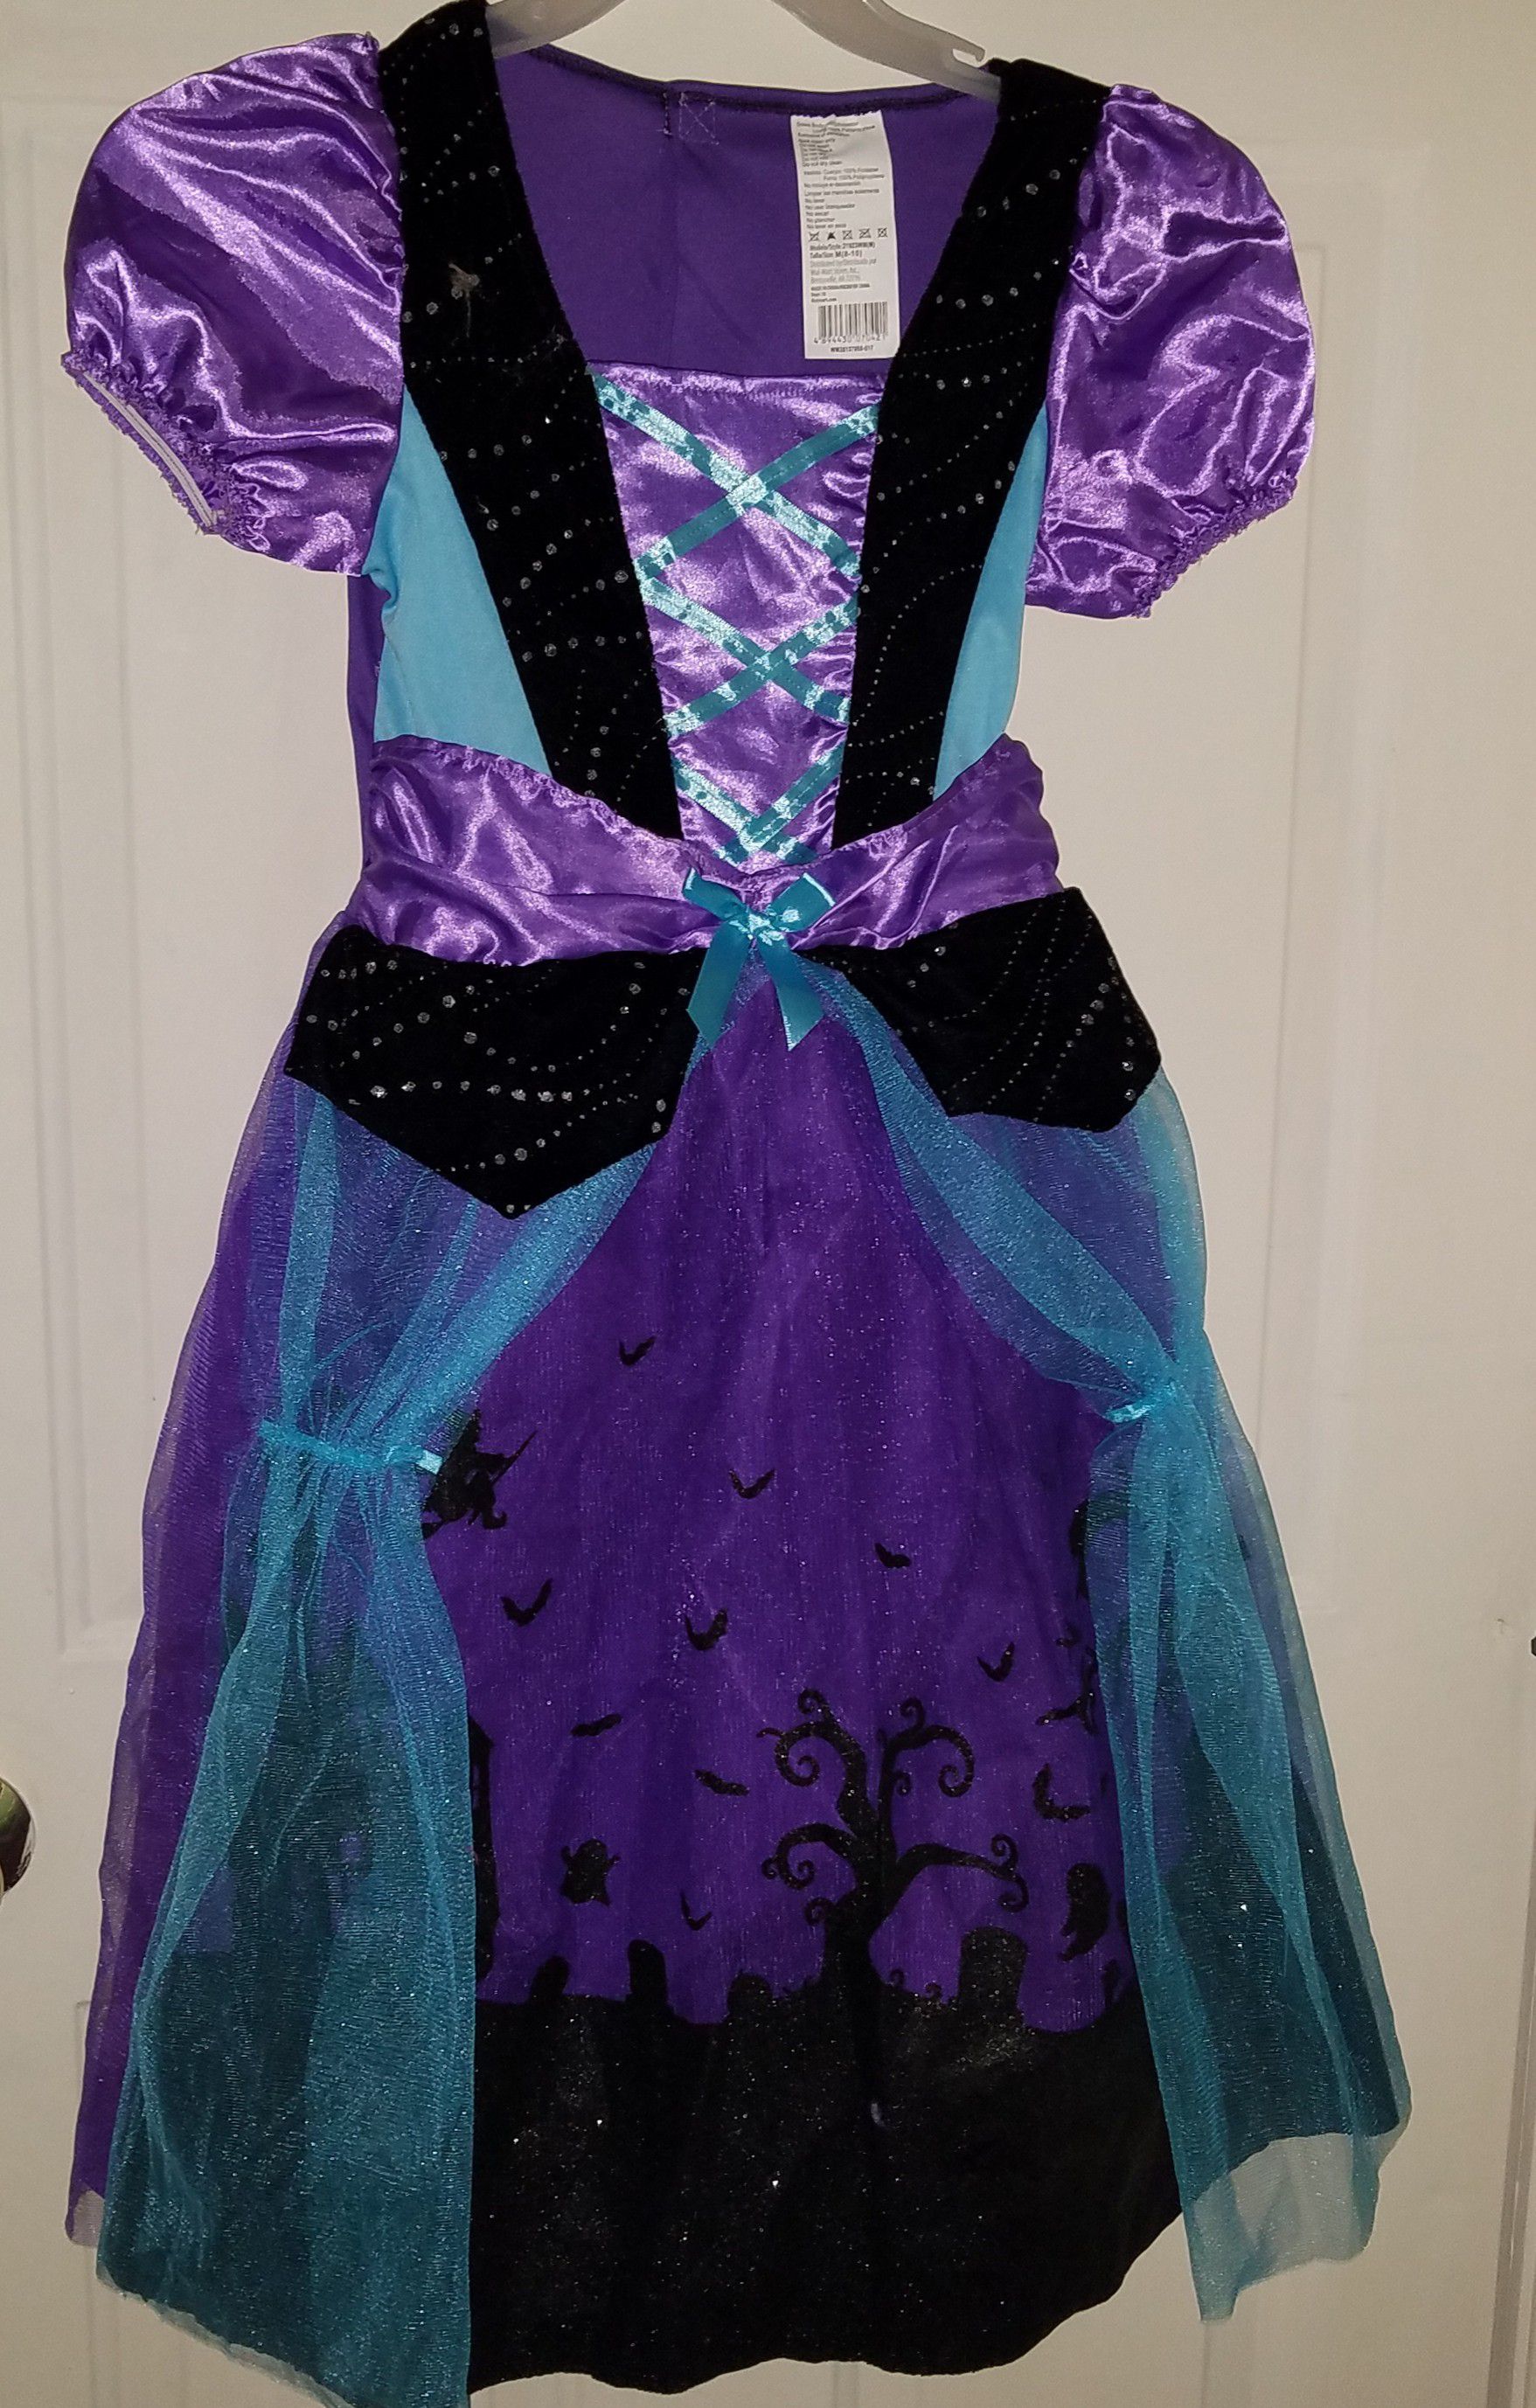 Halloween Witch costume